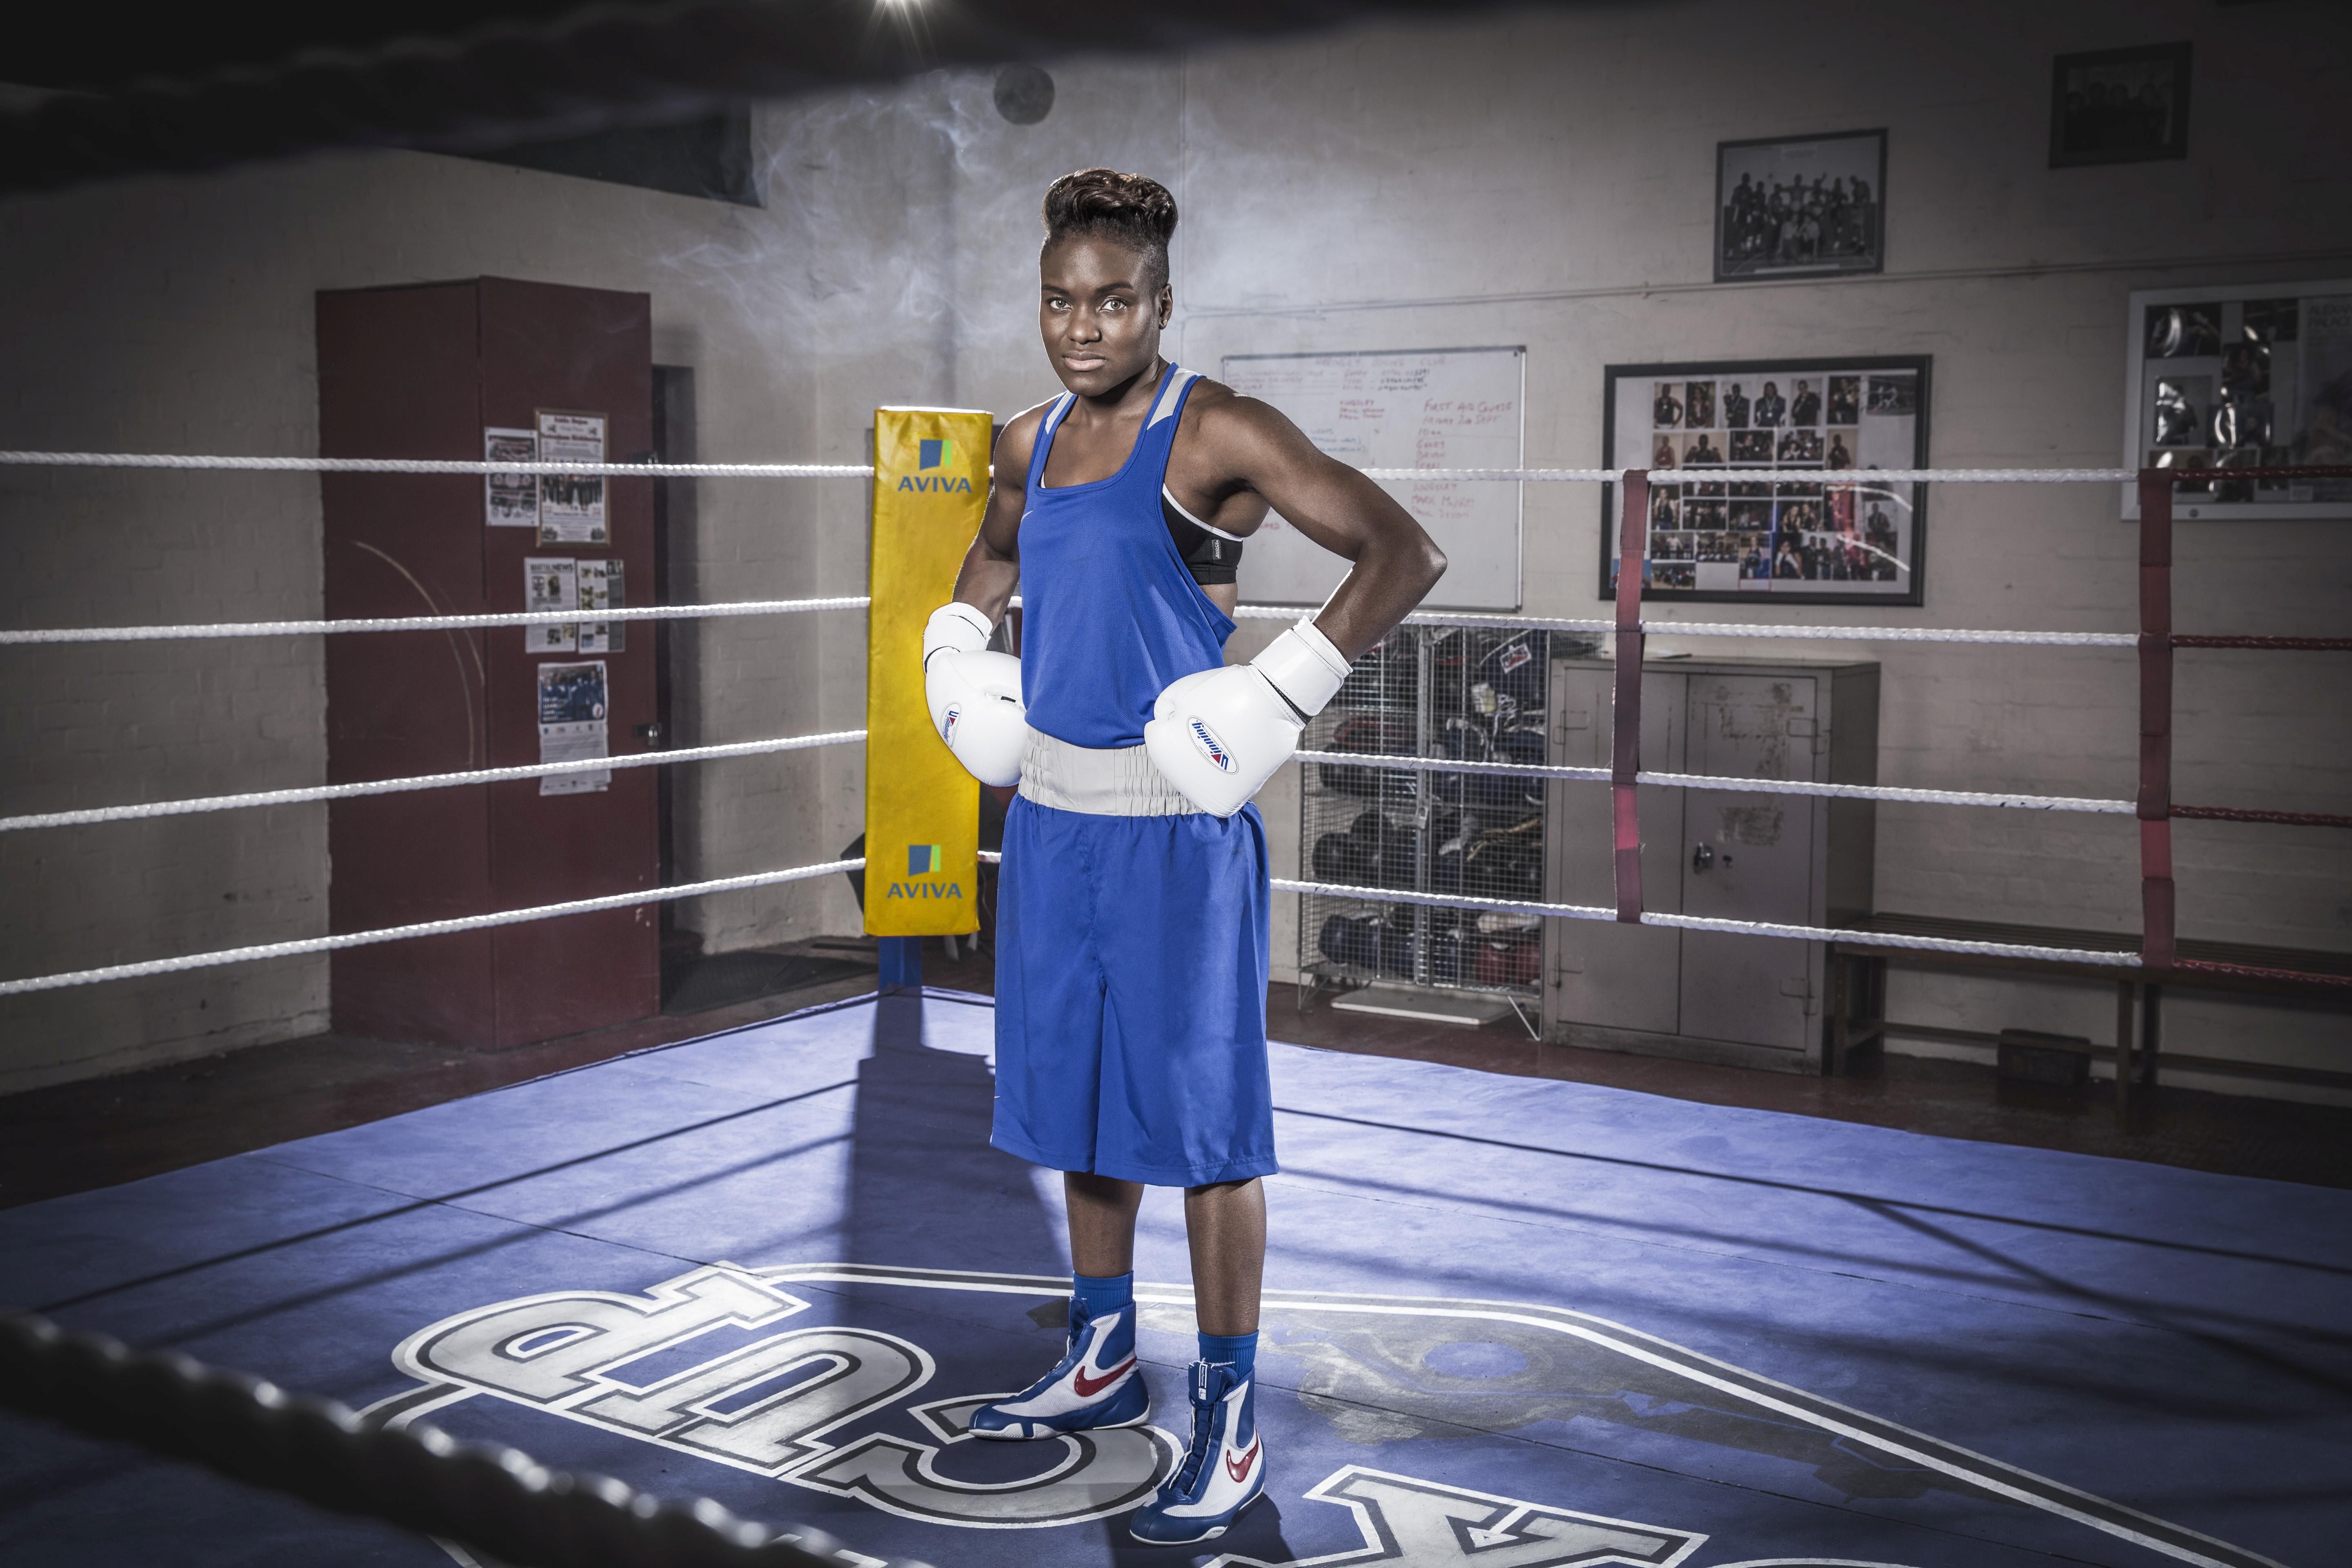 ‘Nicola Adams is supporting the Aviva Community Fund – a nationwide initiative lending a helping hand to grassroots sports clubs and community causes by offering funding of between £1,000 and £25,000.’